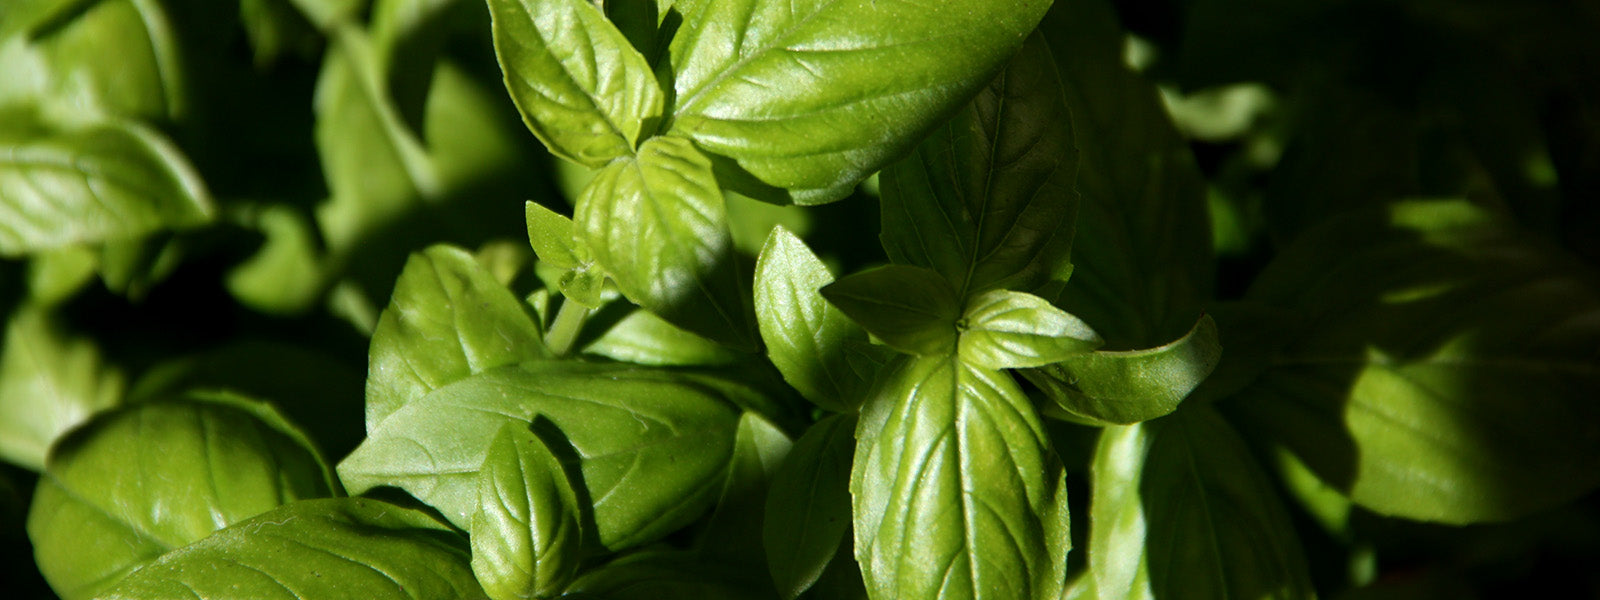 Basil- Health Benefits, Uses and Important Facts